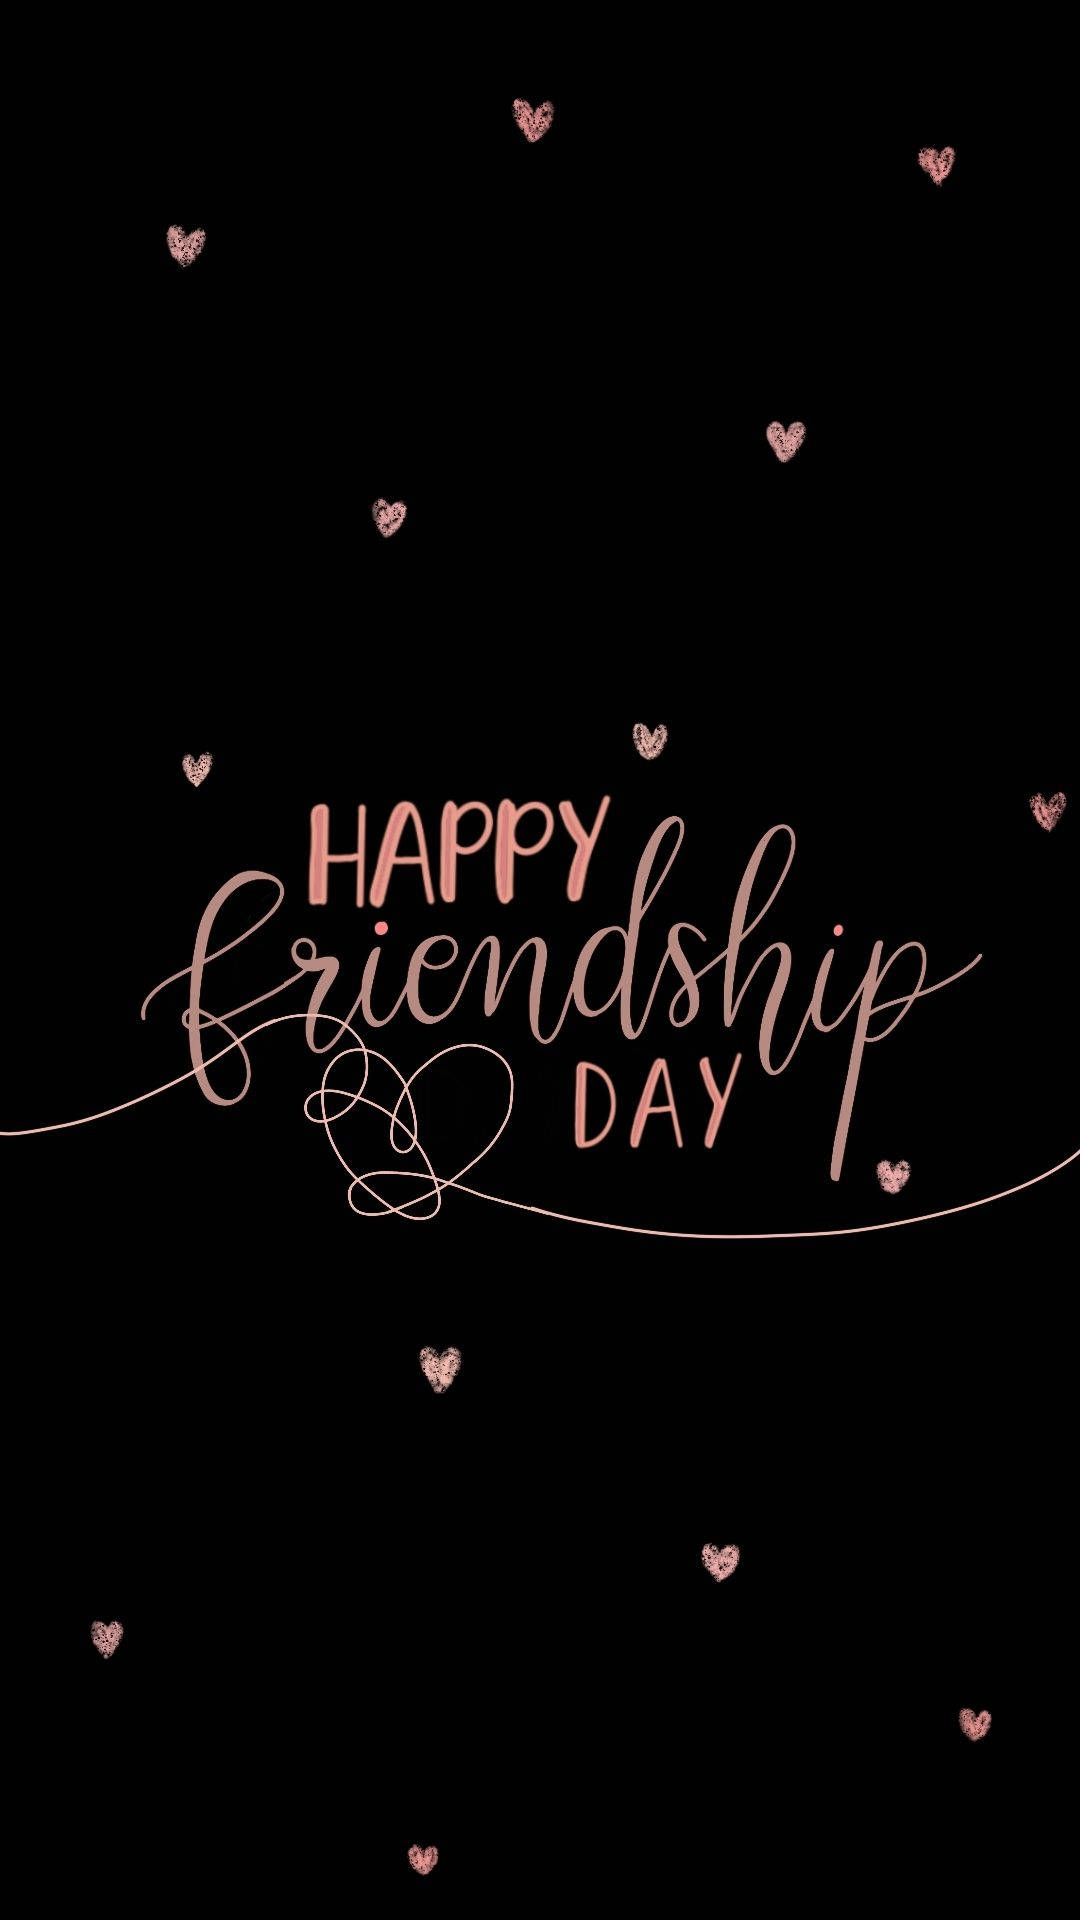 Happy Friendship Day With Hearts